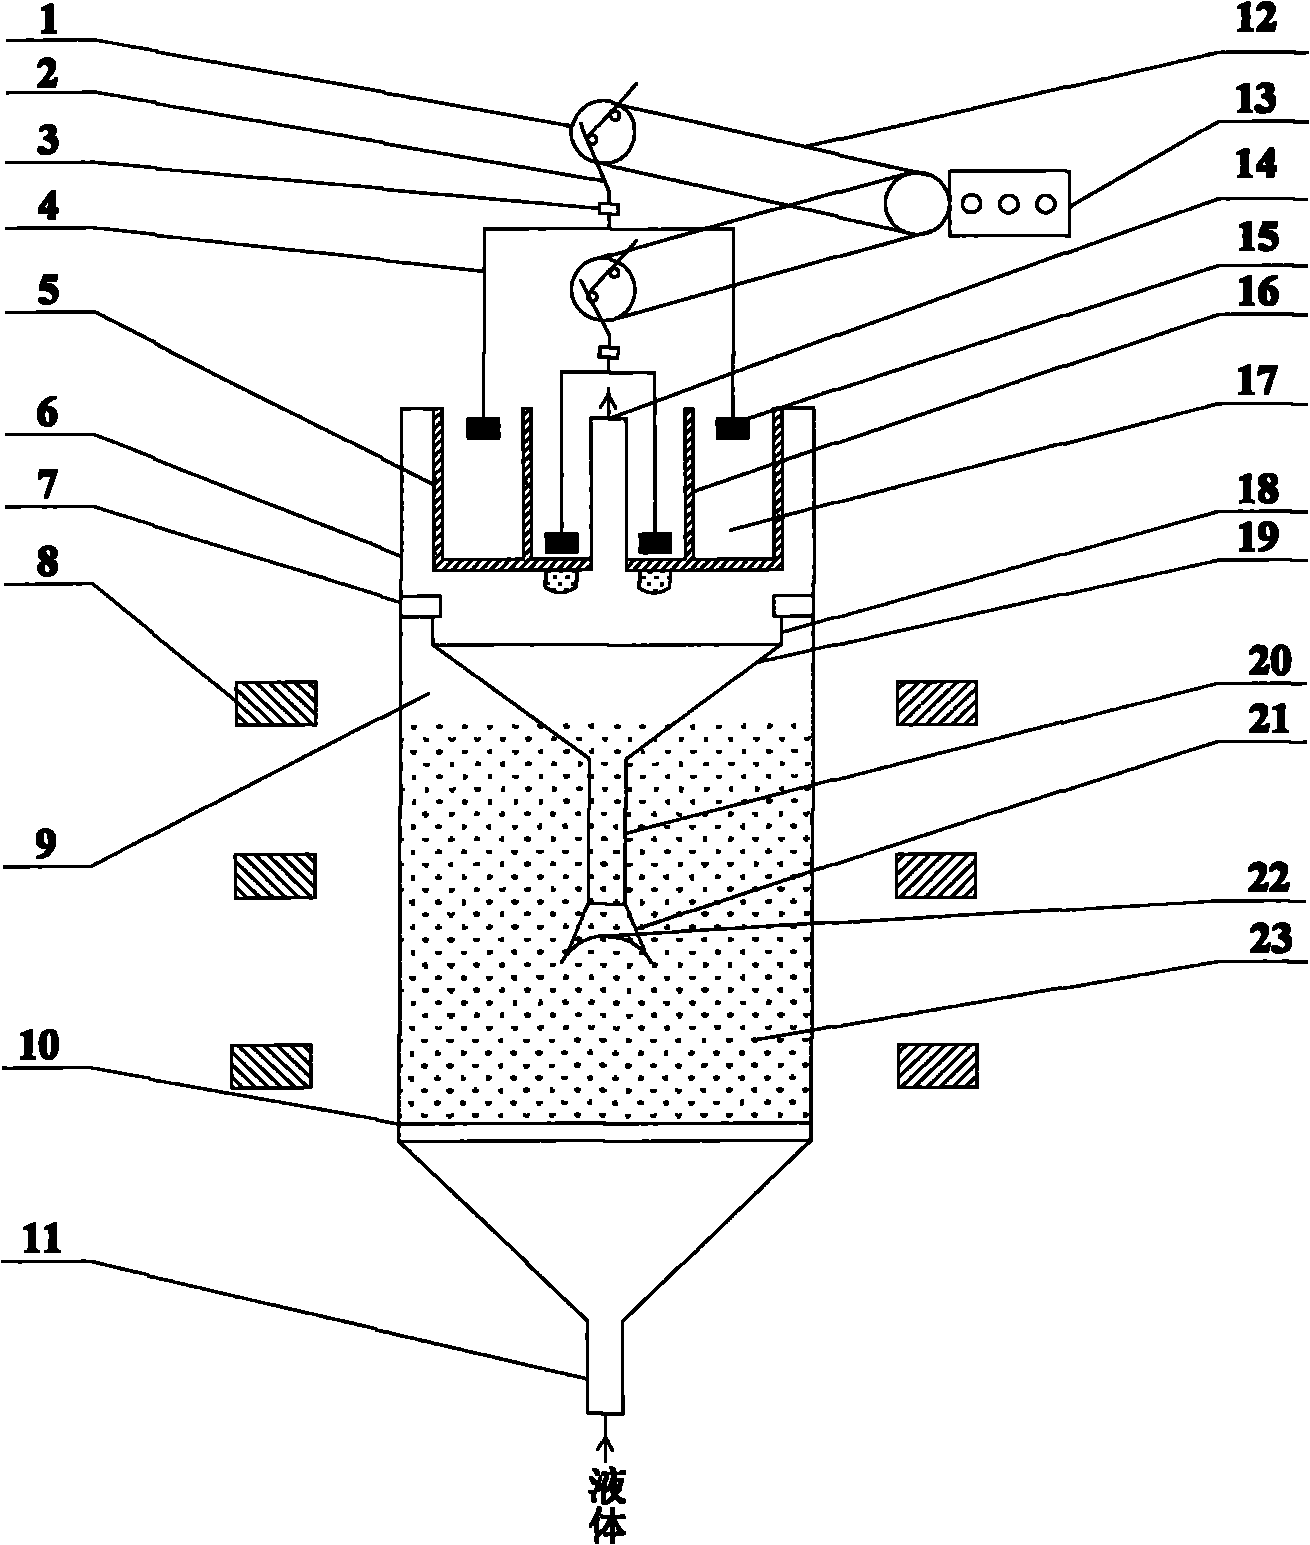 Magnetic-particle in-situ separation device for magnetic stabilization fluidized bed